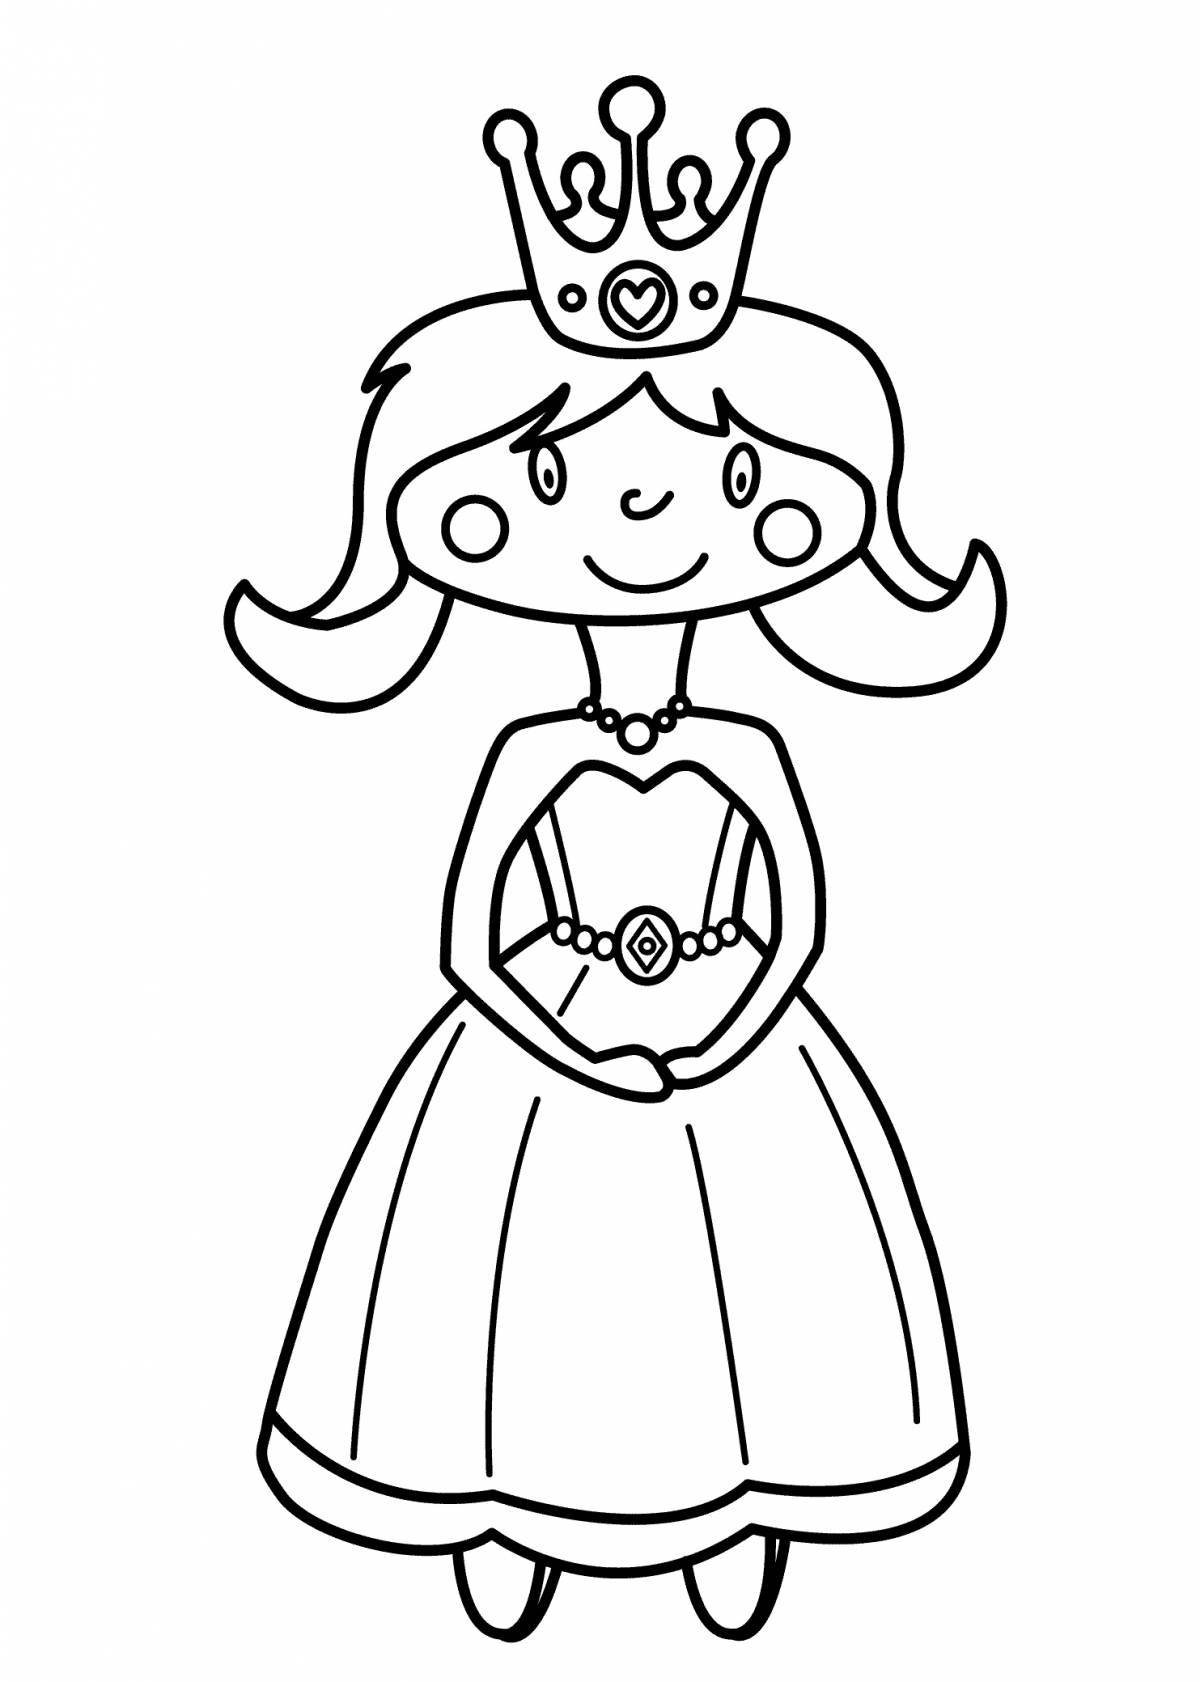 Dreamy princess coloring pages for kids